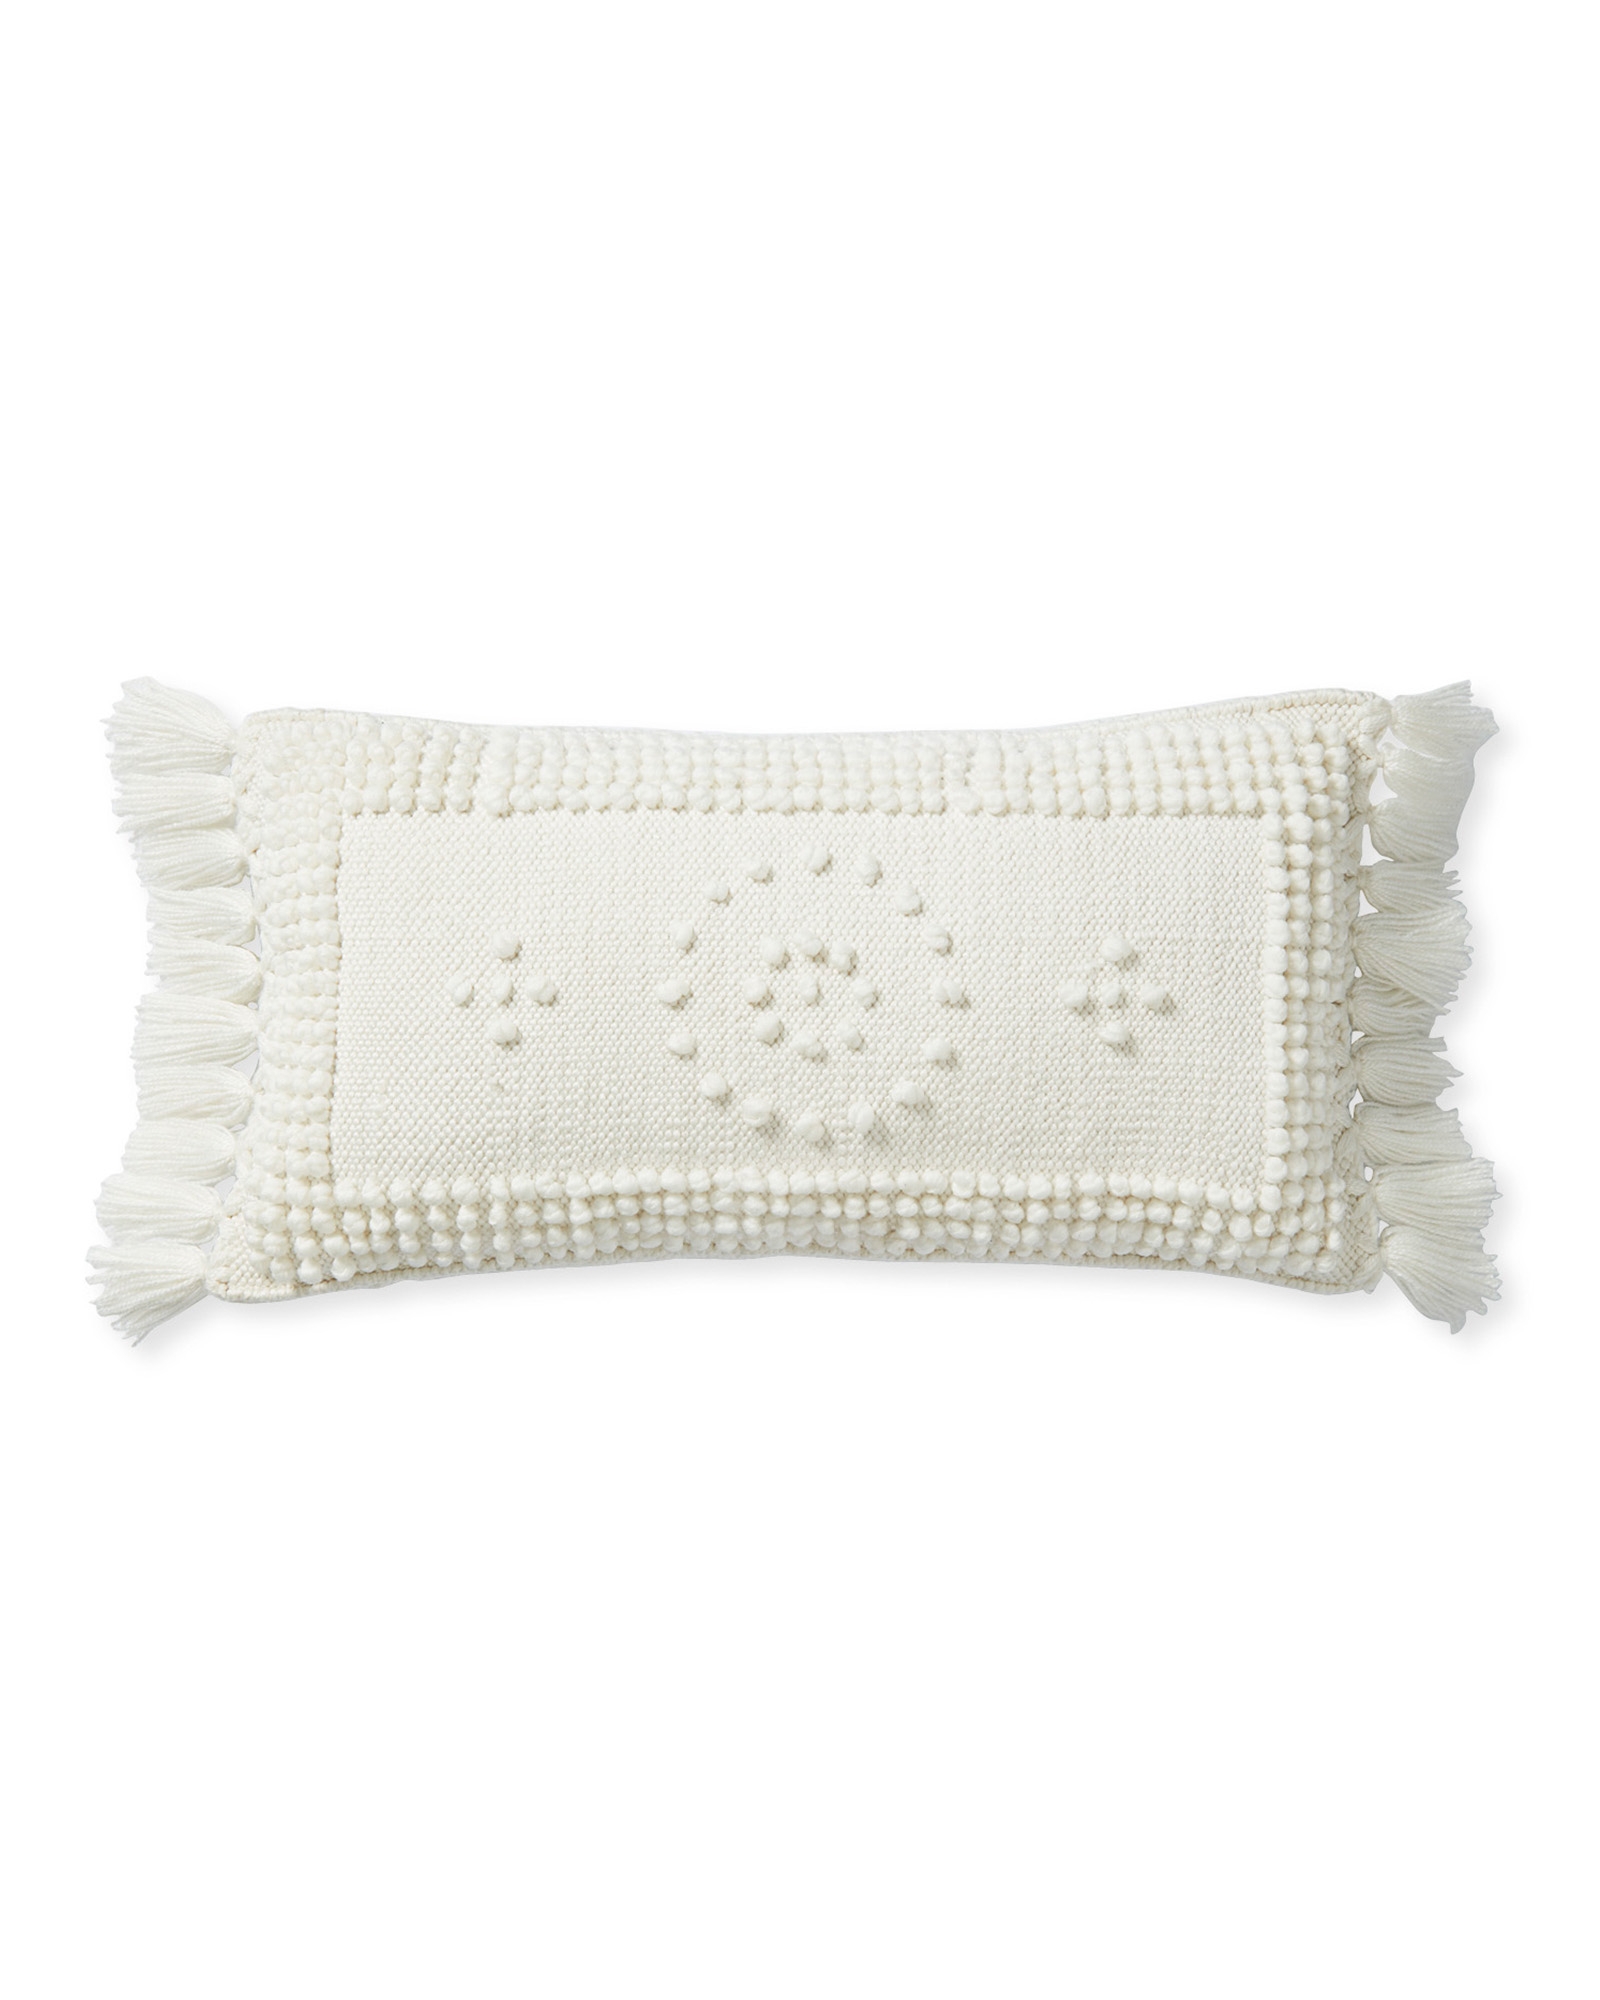 Montecito Outdoor 12" x 21" Pillow Cover - Ivory - Insert sold separately - Image 0